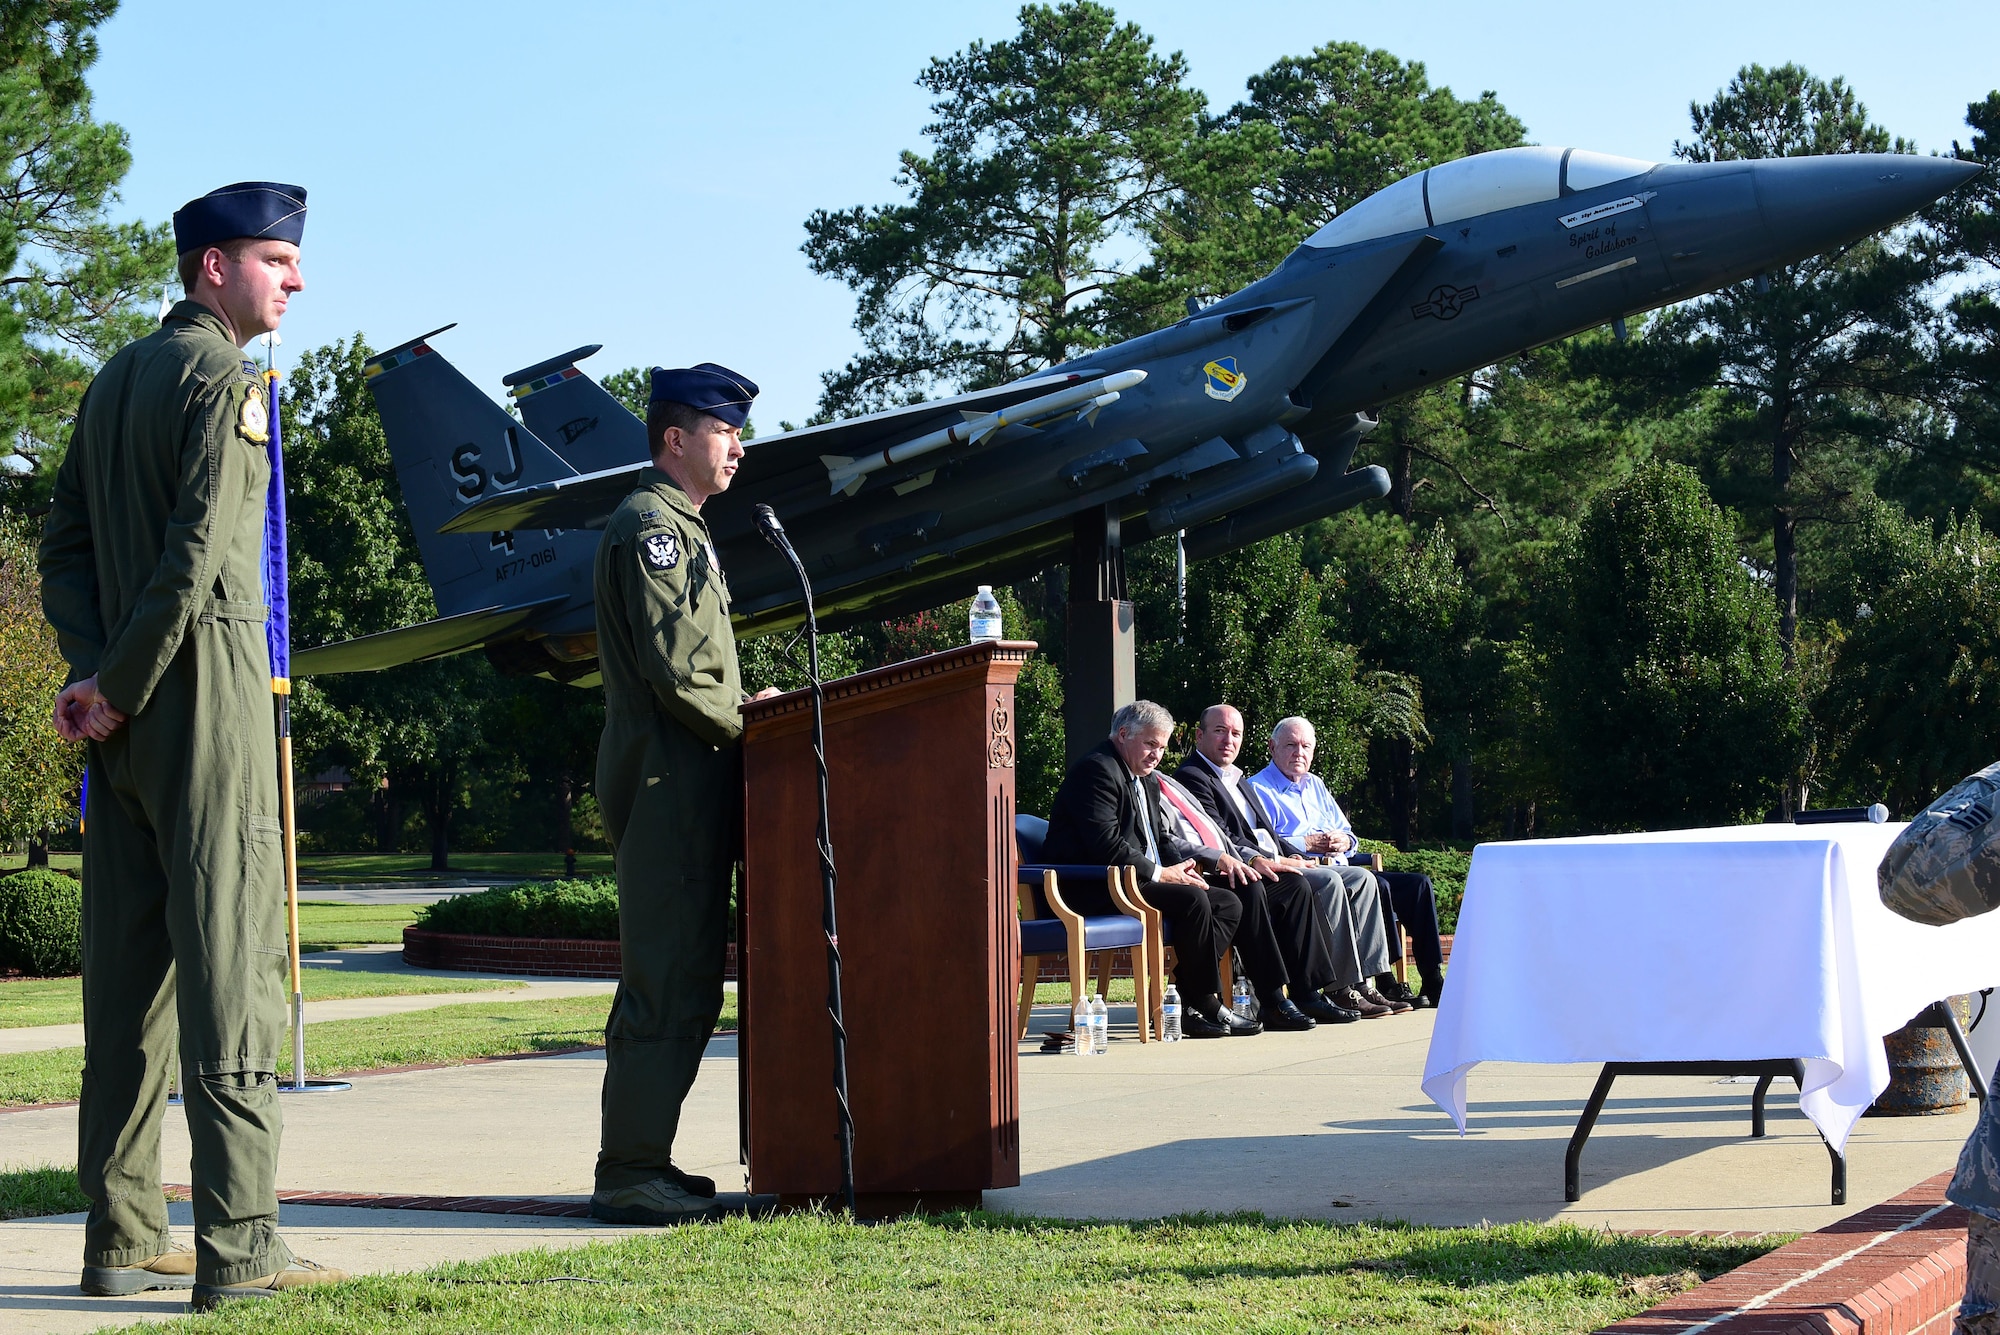 Col. Christopher Sage, 4th Fighter Wing commander, addresses the audience during the 2017 Time Capsule Unveiling, Sept. 15, 2017, at Seymour Johnson Air Force Base, North Carolina. Sage said he is honored to be part of such a significant historical event which will tell the 4th FW’s story to those who unearth the capsule 25 years from now. (U.S. Air Force photo by Airman 1st Class Kenneth Boyton)